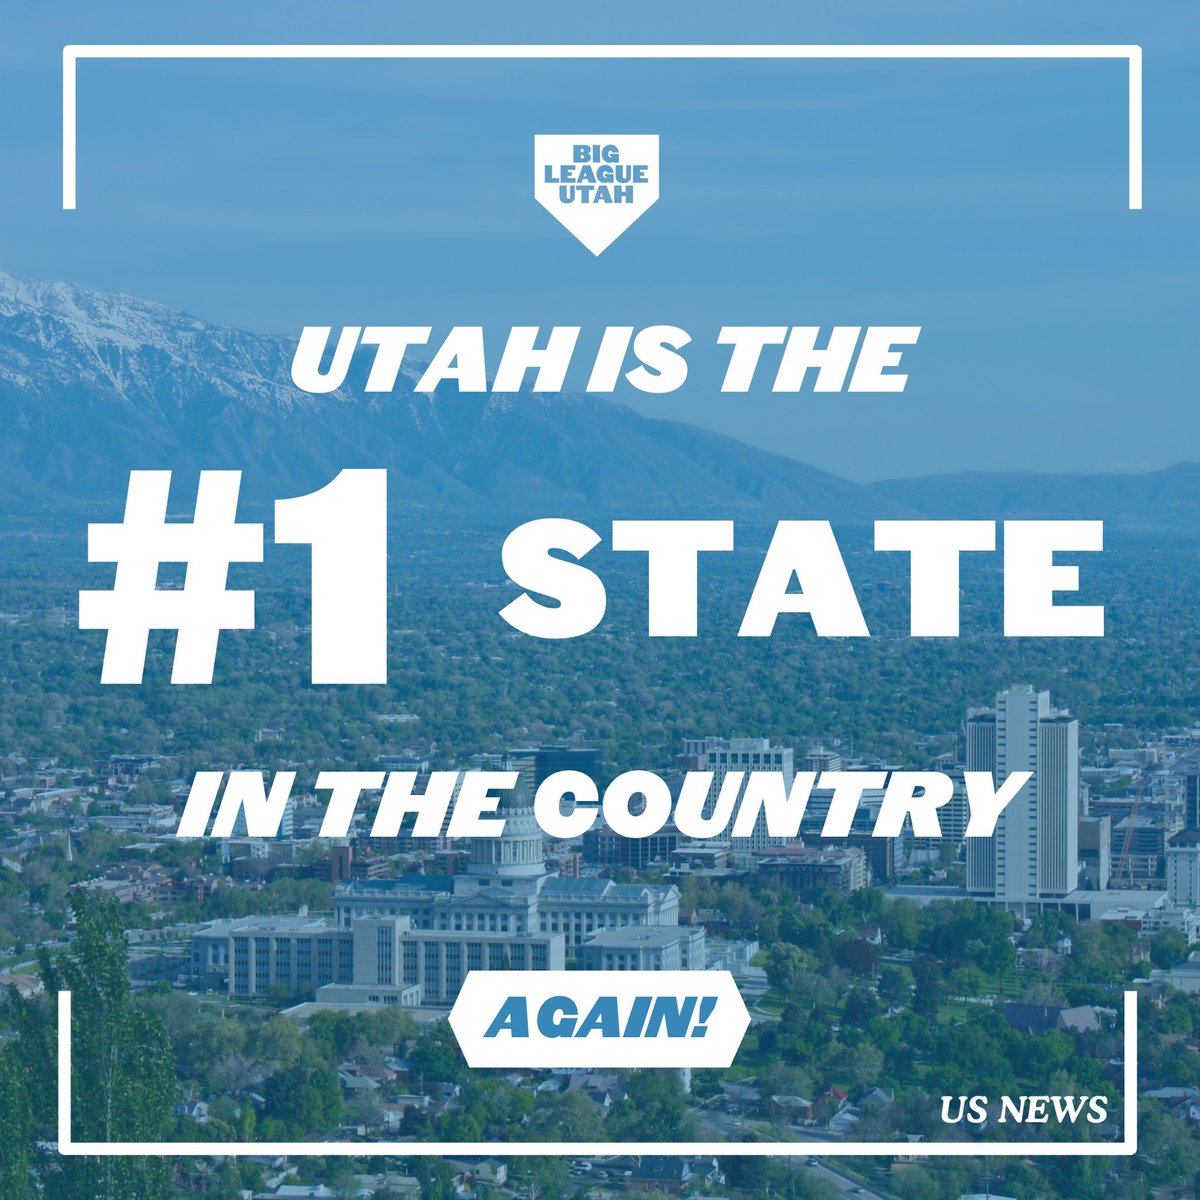 US News has named Utah the #1 state in America for the SECOND STRAIGHT year! The Beehive State shined for its consistency and well-rounded nature, performing best in education, economy and infrastructure. Head to @usnews for more information!